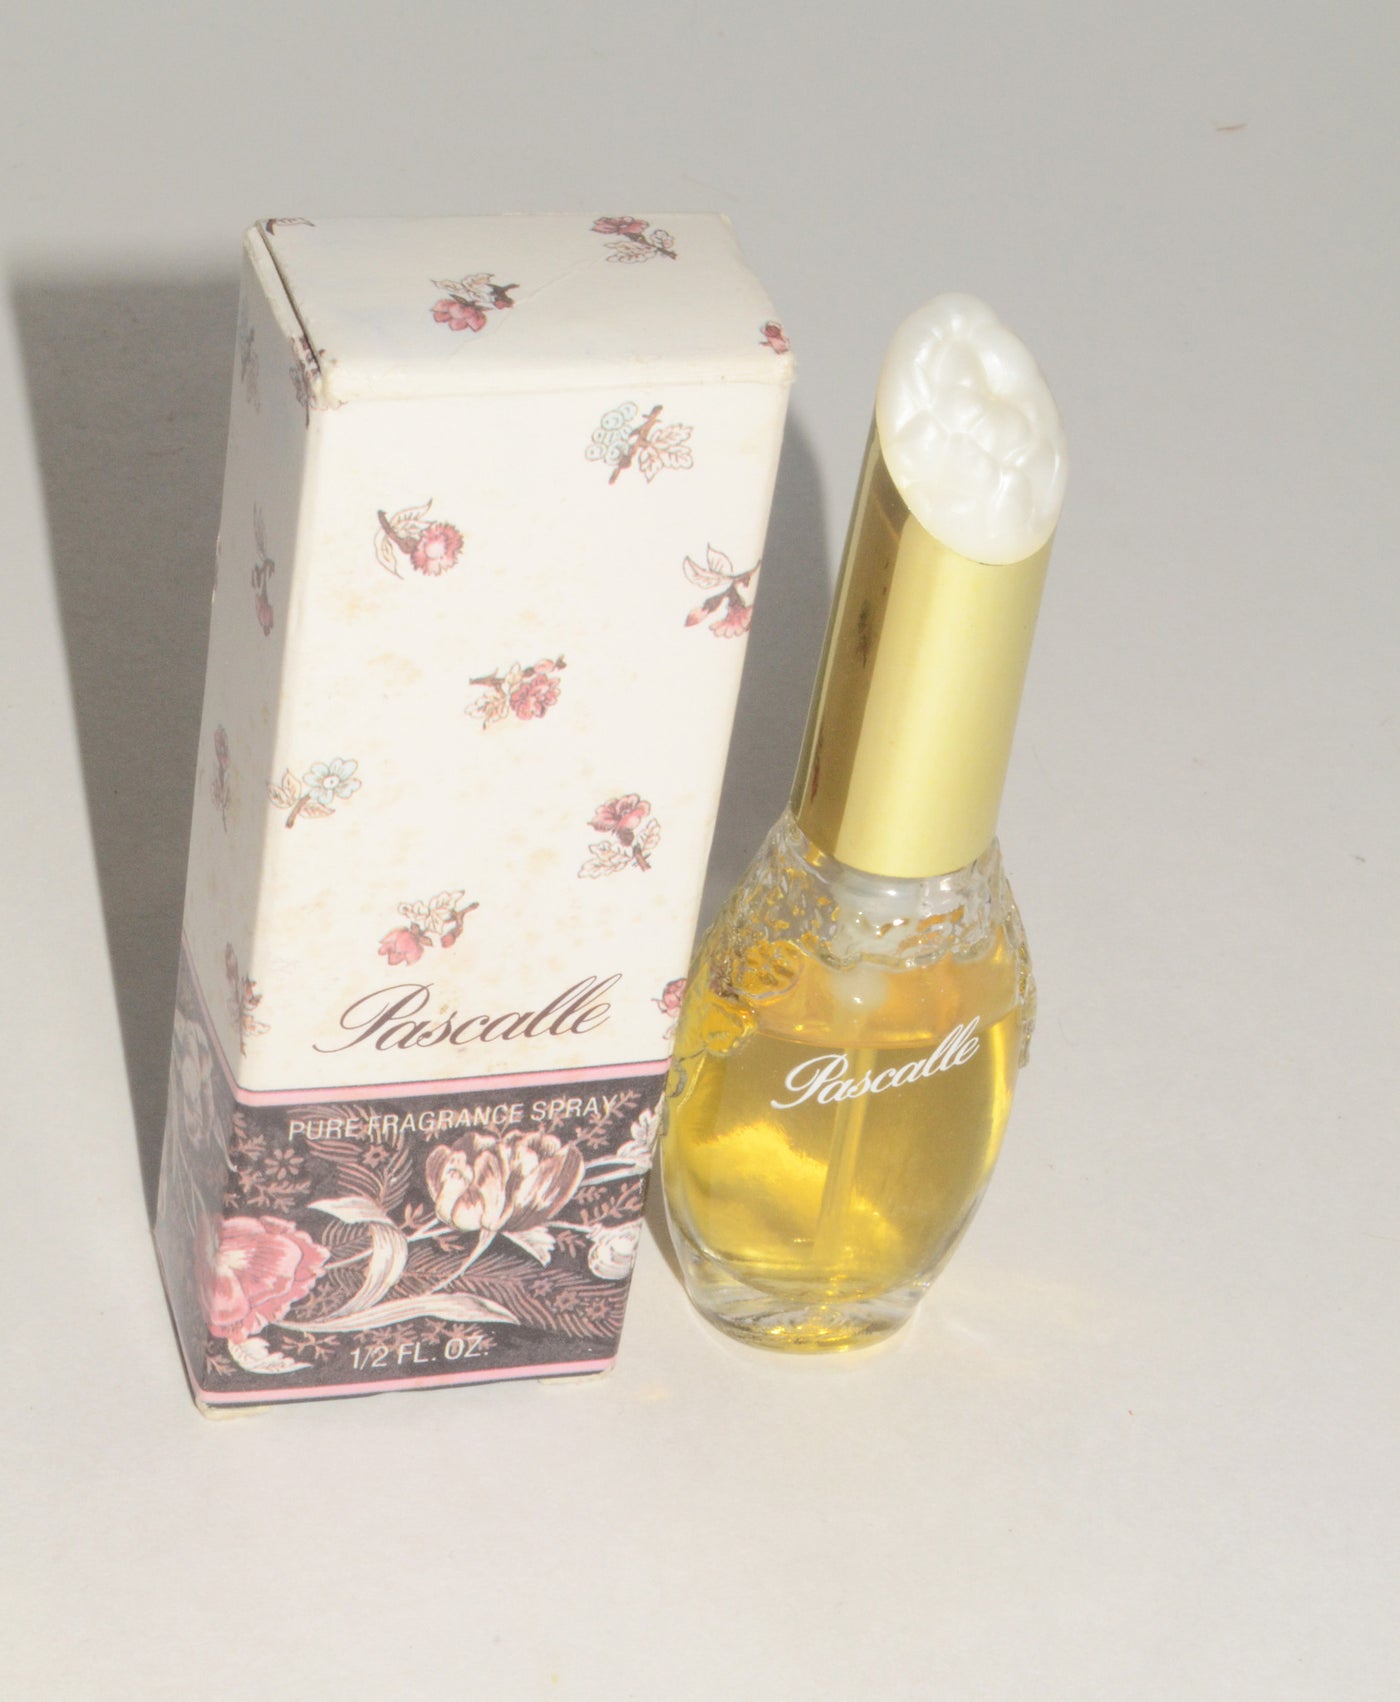 Vintage Pascalle Pure Fragrance Spray